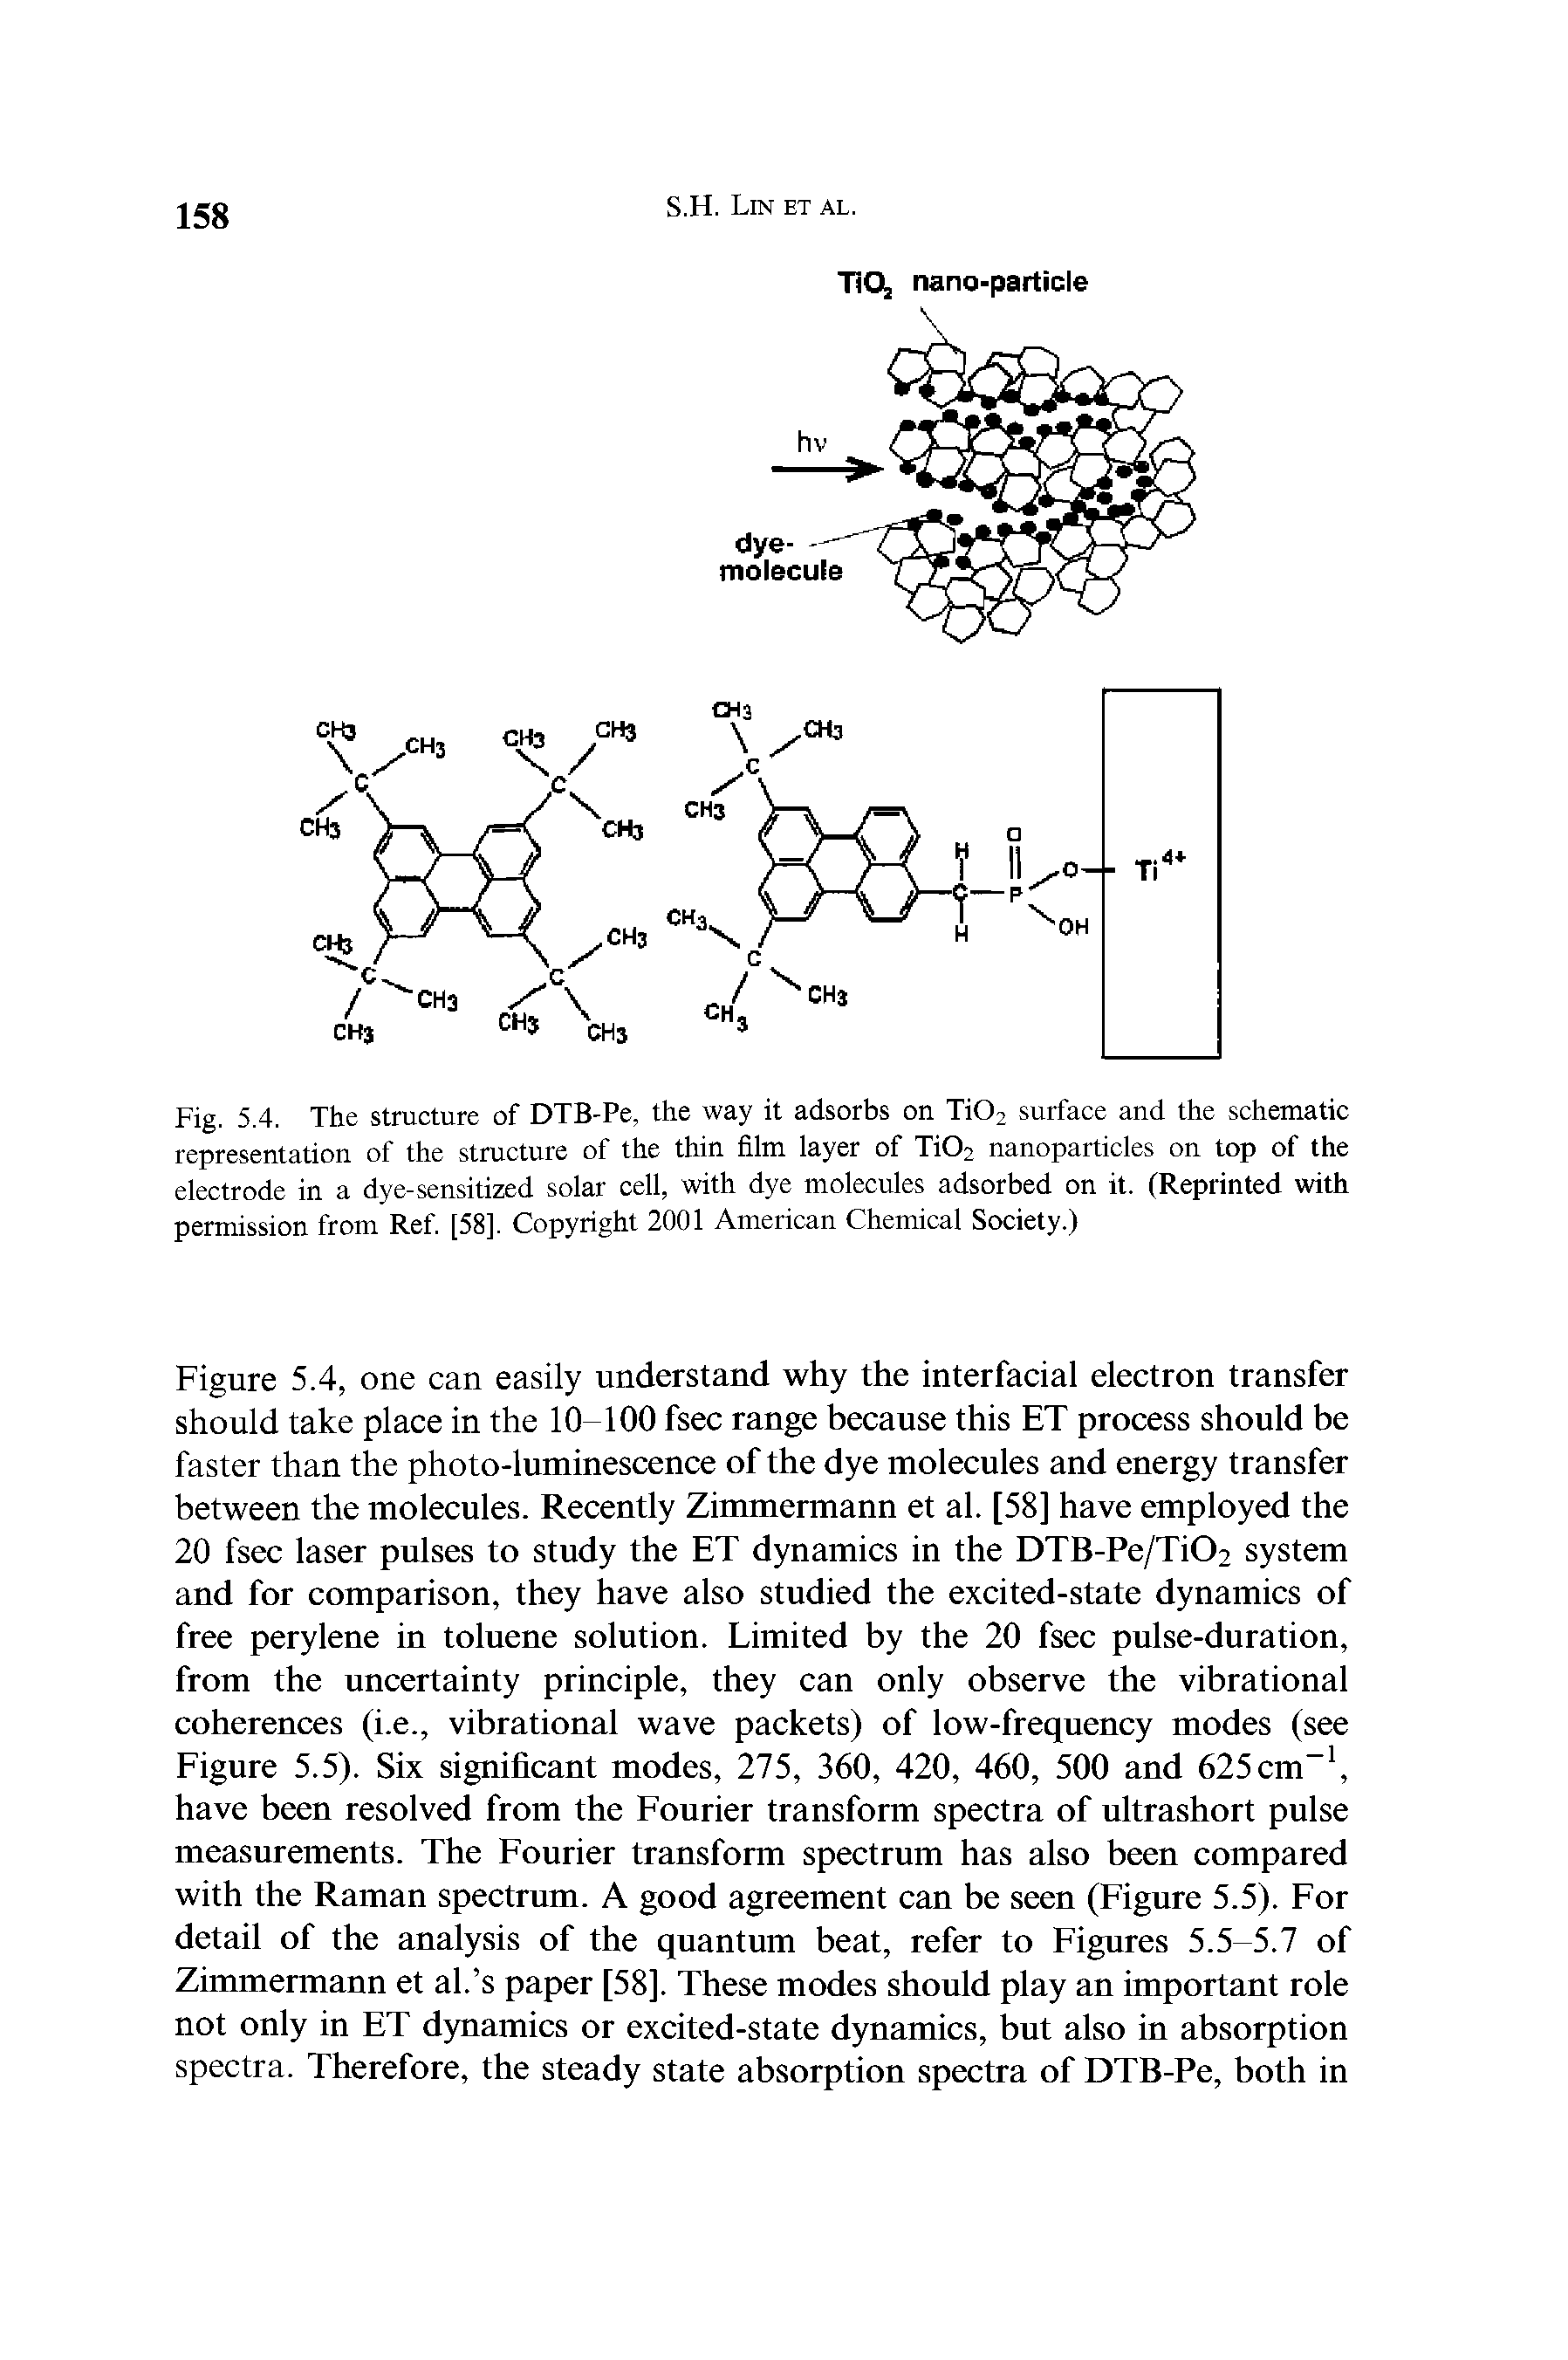 Fig. 5 4. The structure of DTB-Pe, the way it adsorbs on TiOz surface and the schematic representation of the structure of the thin film layer of Ti02 nanoparticles on top of the electrode in a dye-sensitized solar cell, with dye molecules adsorbed on it. (Reprinted with permission from Ref. [58]. Copyright 2001 American Chemical Society.)...